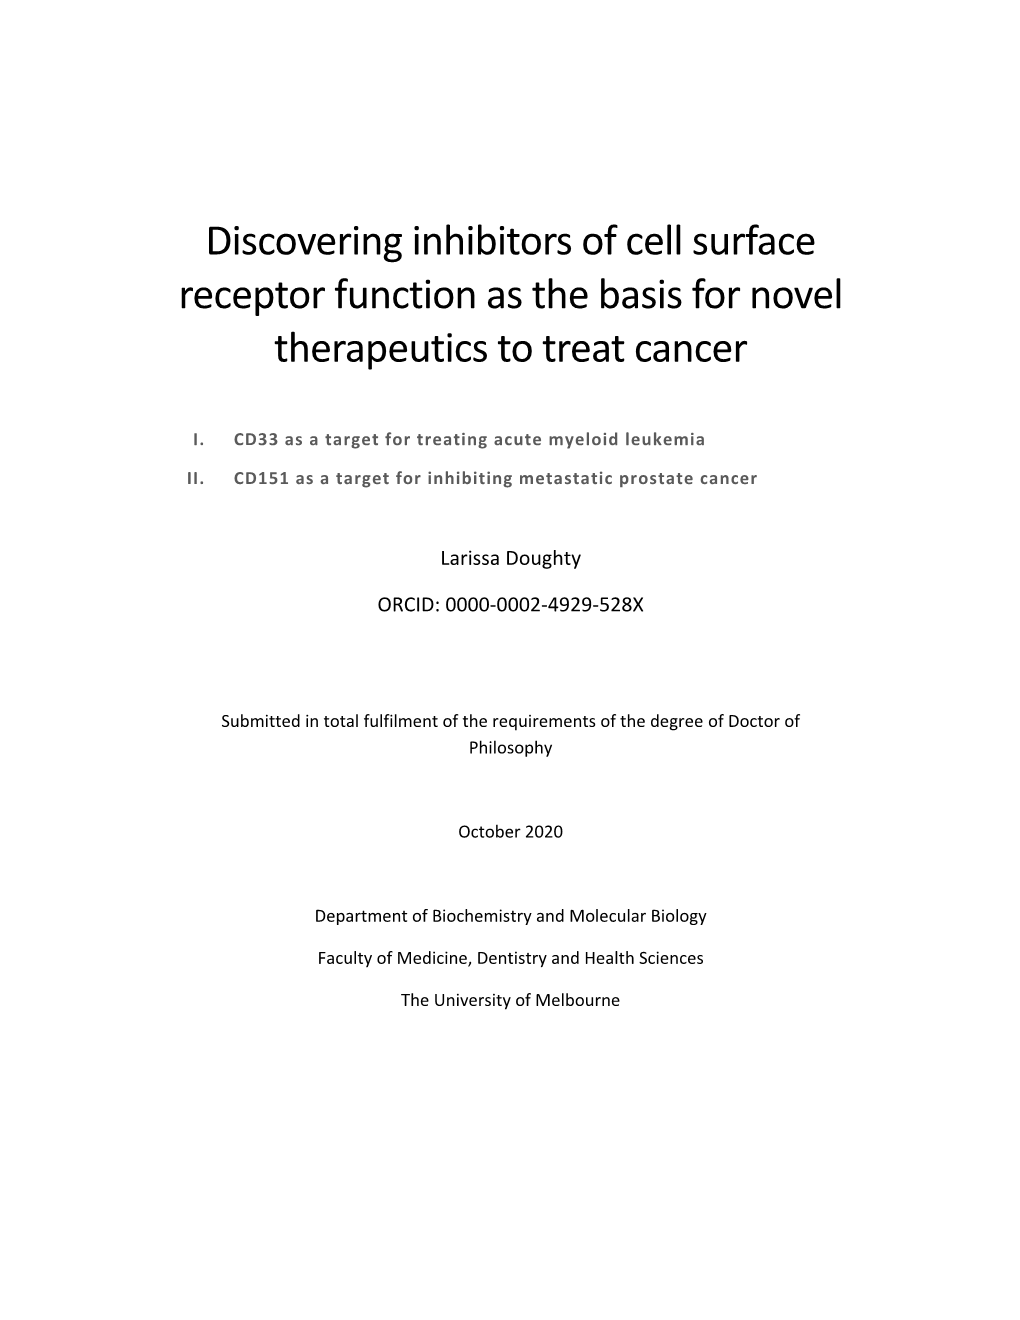 Discovering Inhibitors of Cell Surface Receptor Function As the Basis for Novel Therapeutics to Treat Cancer